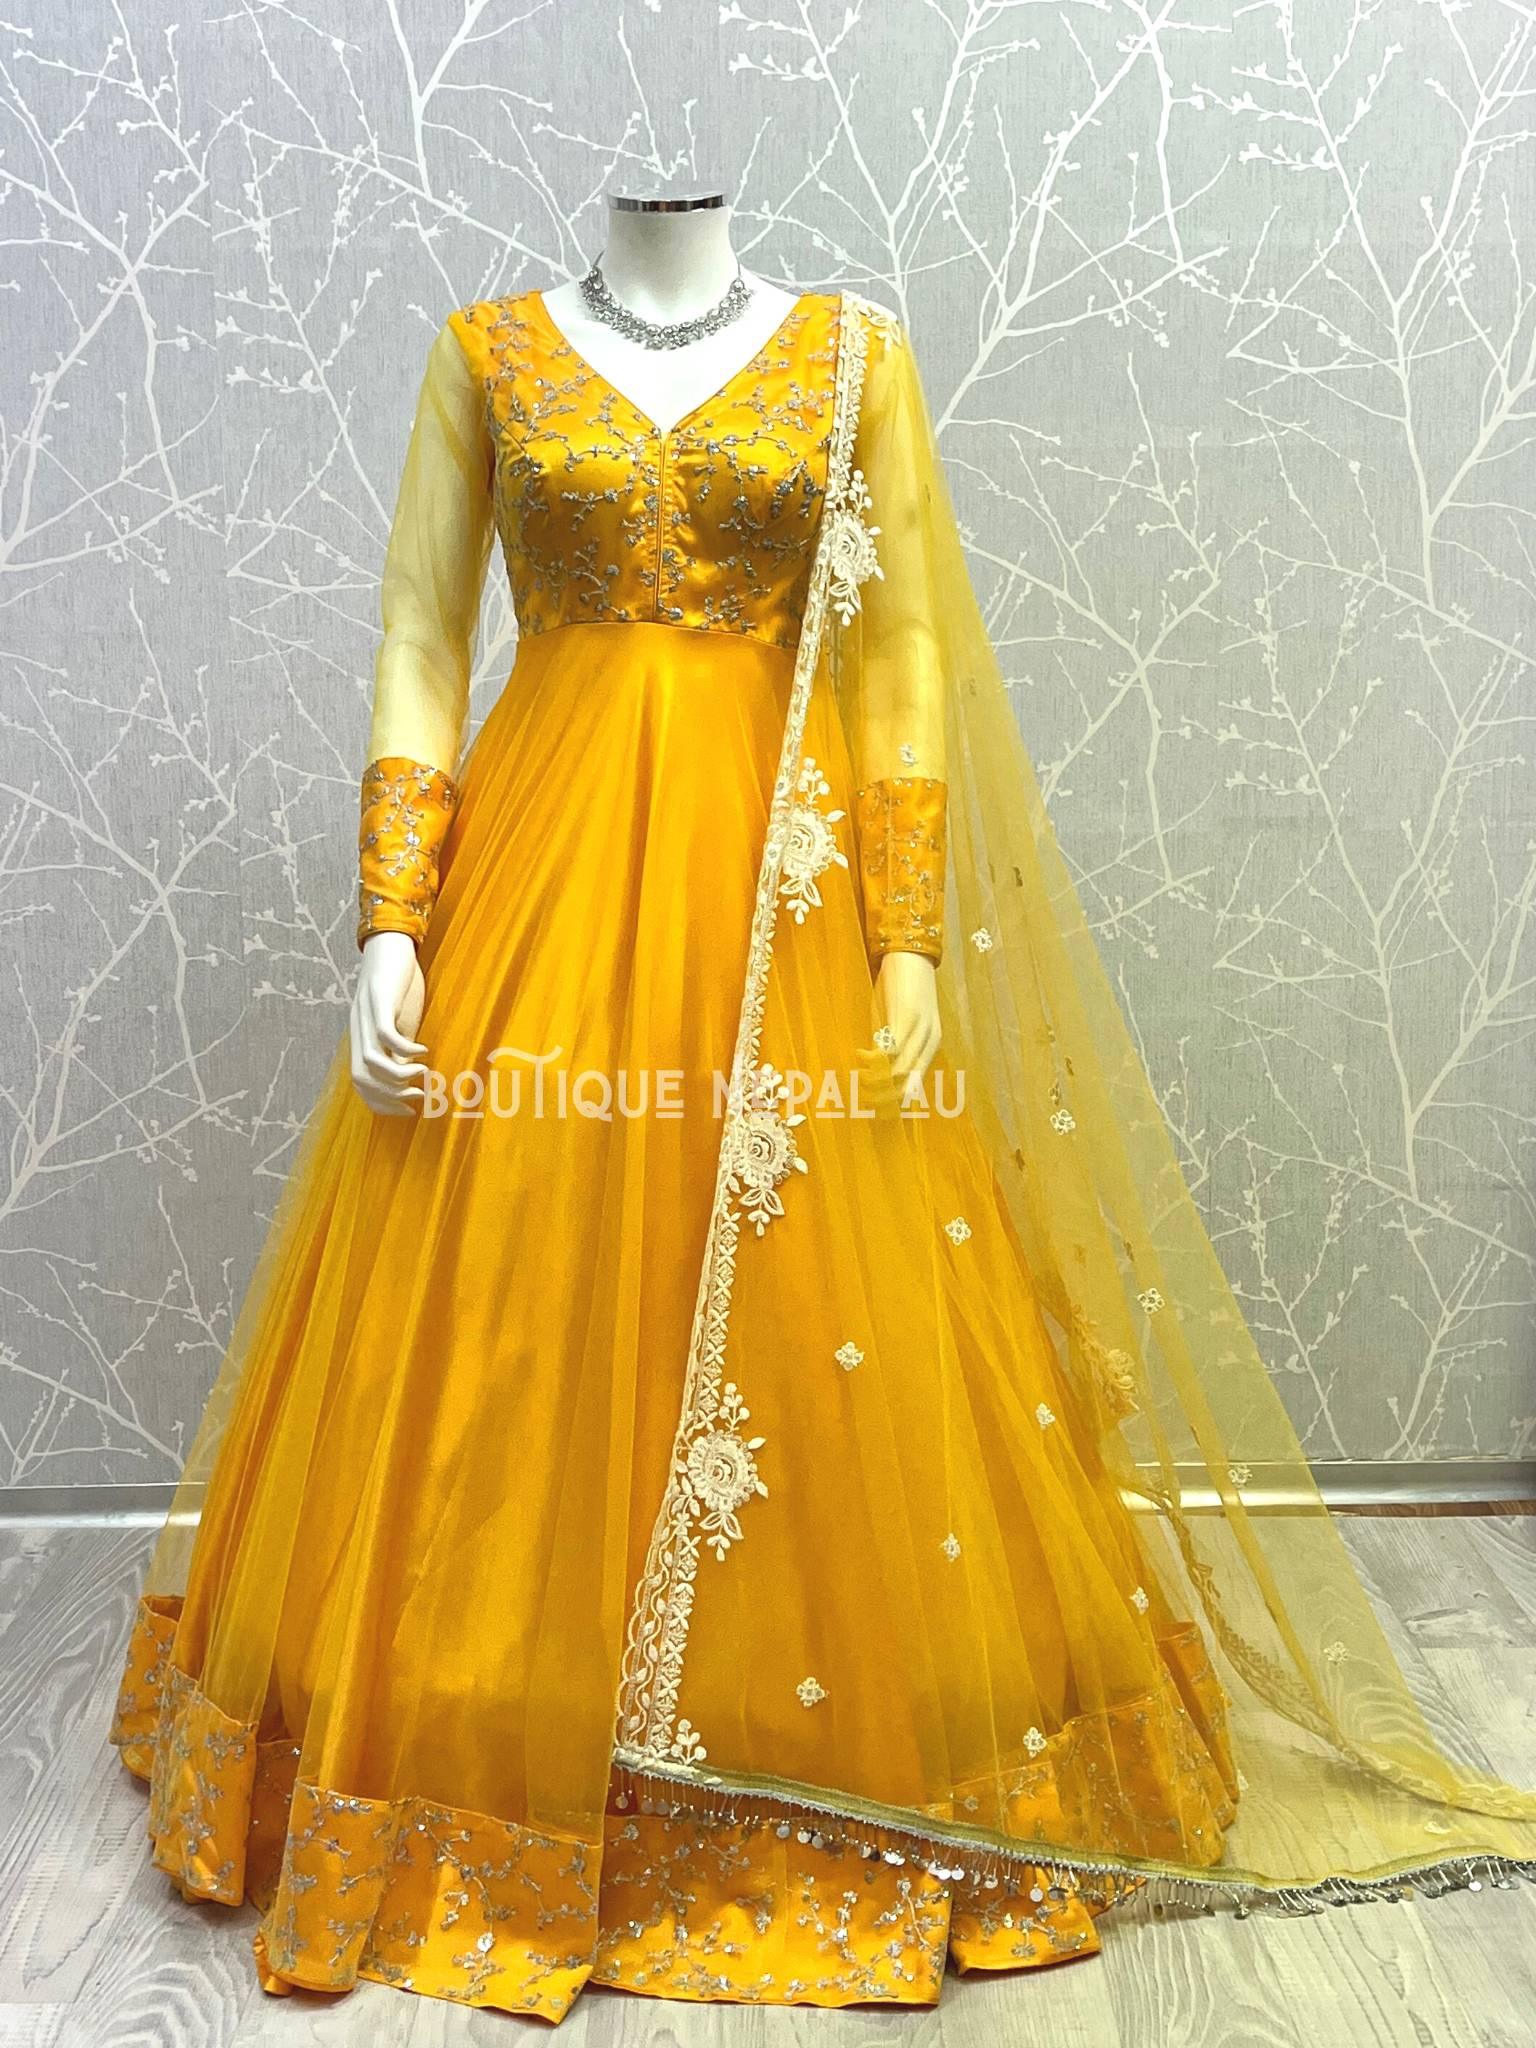 One Piece Dresses - One Piece Gown Party Ware Dress In Chanderi Silk  Sleeves can be attached Embroidery Worked High Quality - Kathmandu District  - Nepal - One Piece Dresses - Pradesh